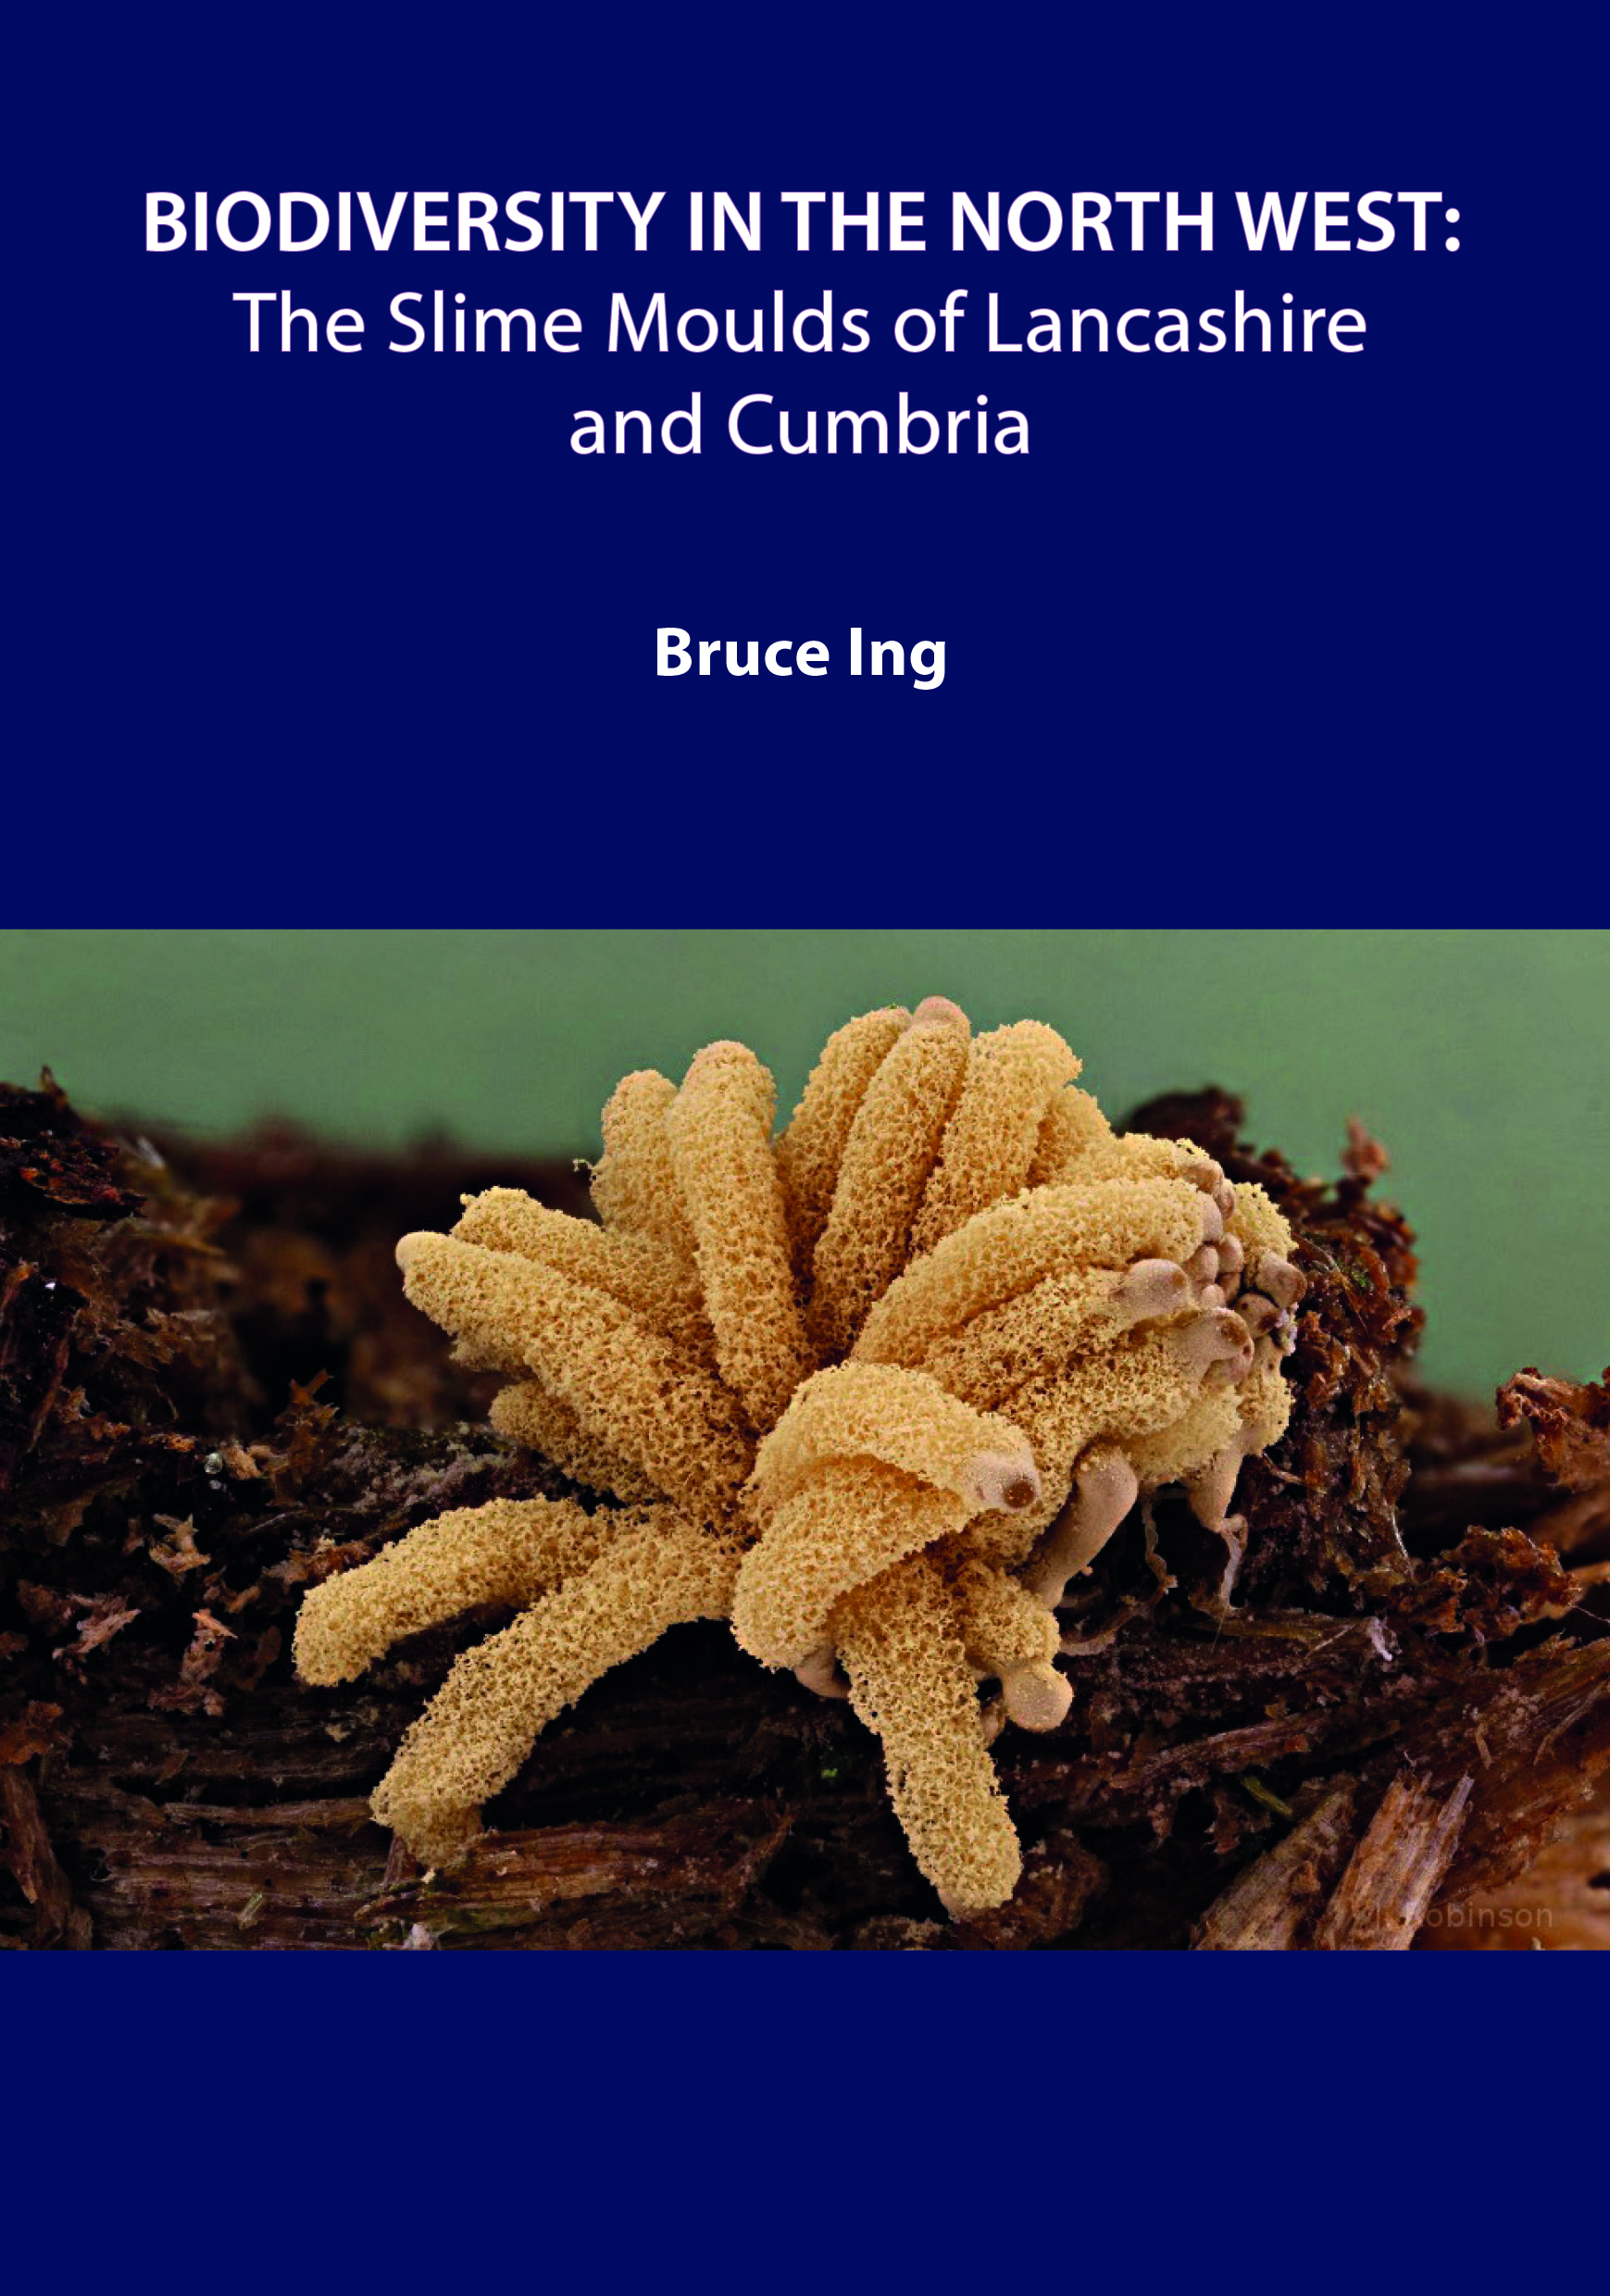 Biodiversity in the North West: The Slime Moulds of Lancashire and Cumbria